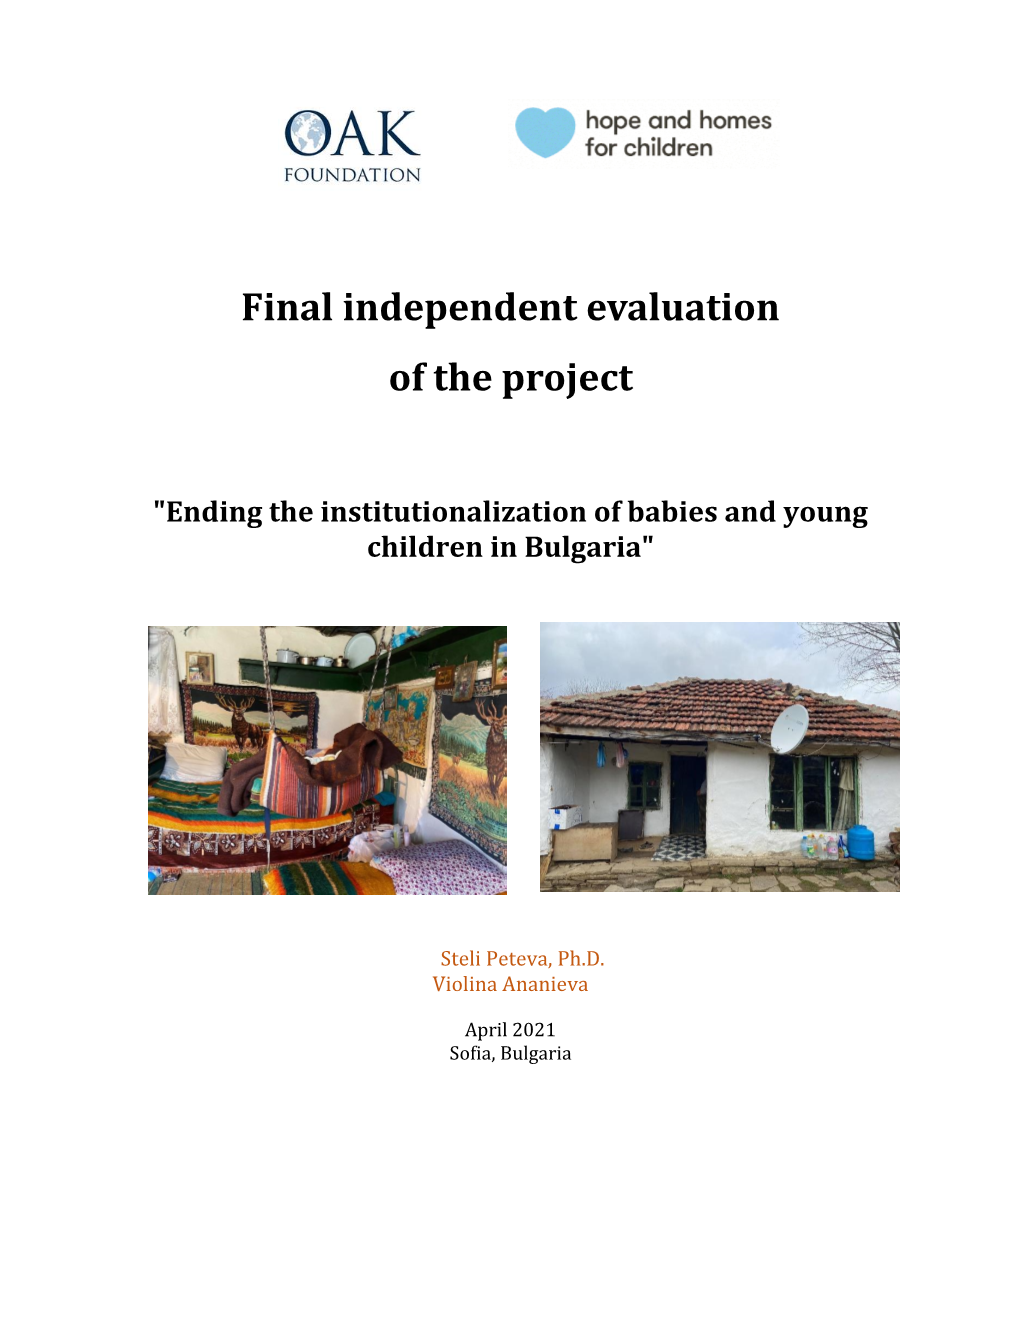 Final Independent Evaluation of the Project "Ending The